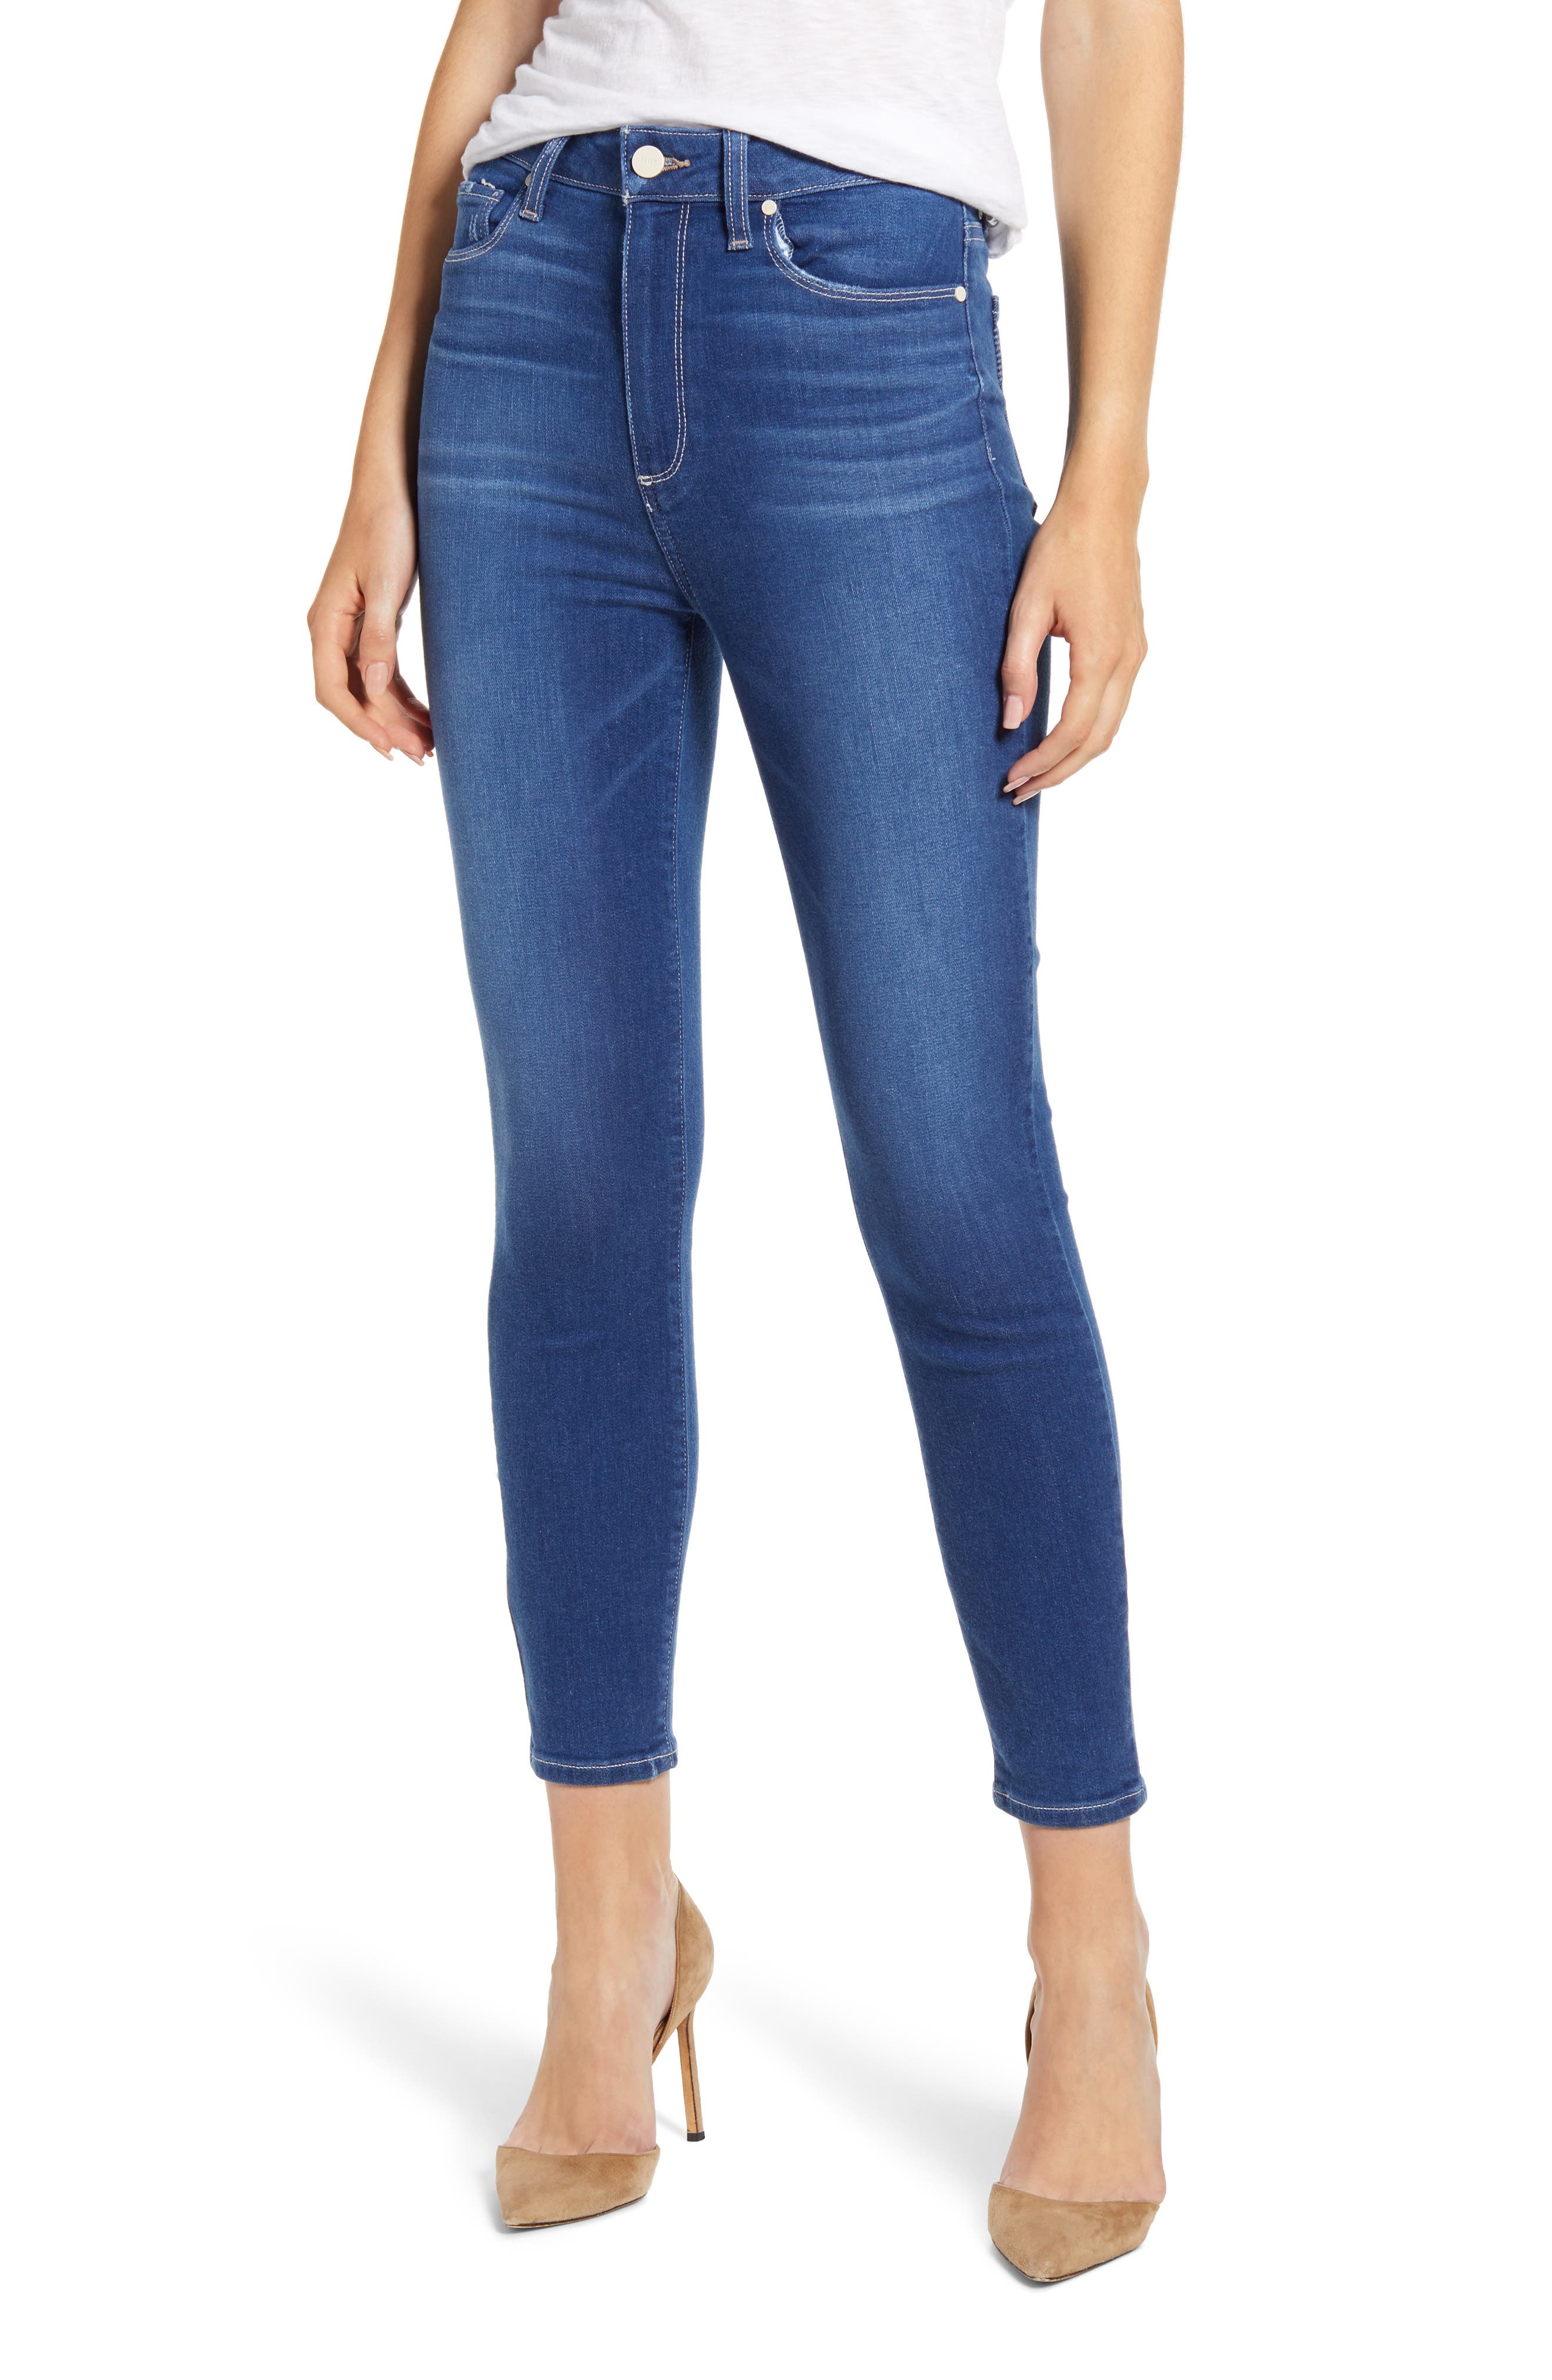 best shape jeans for big thighs